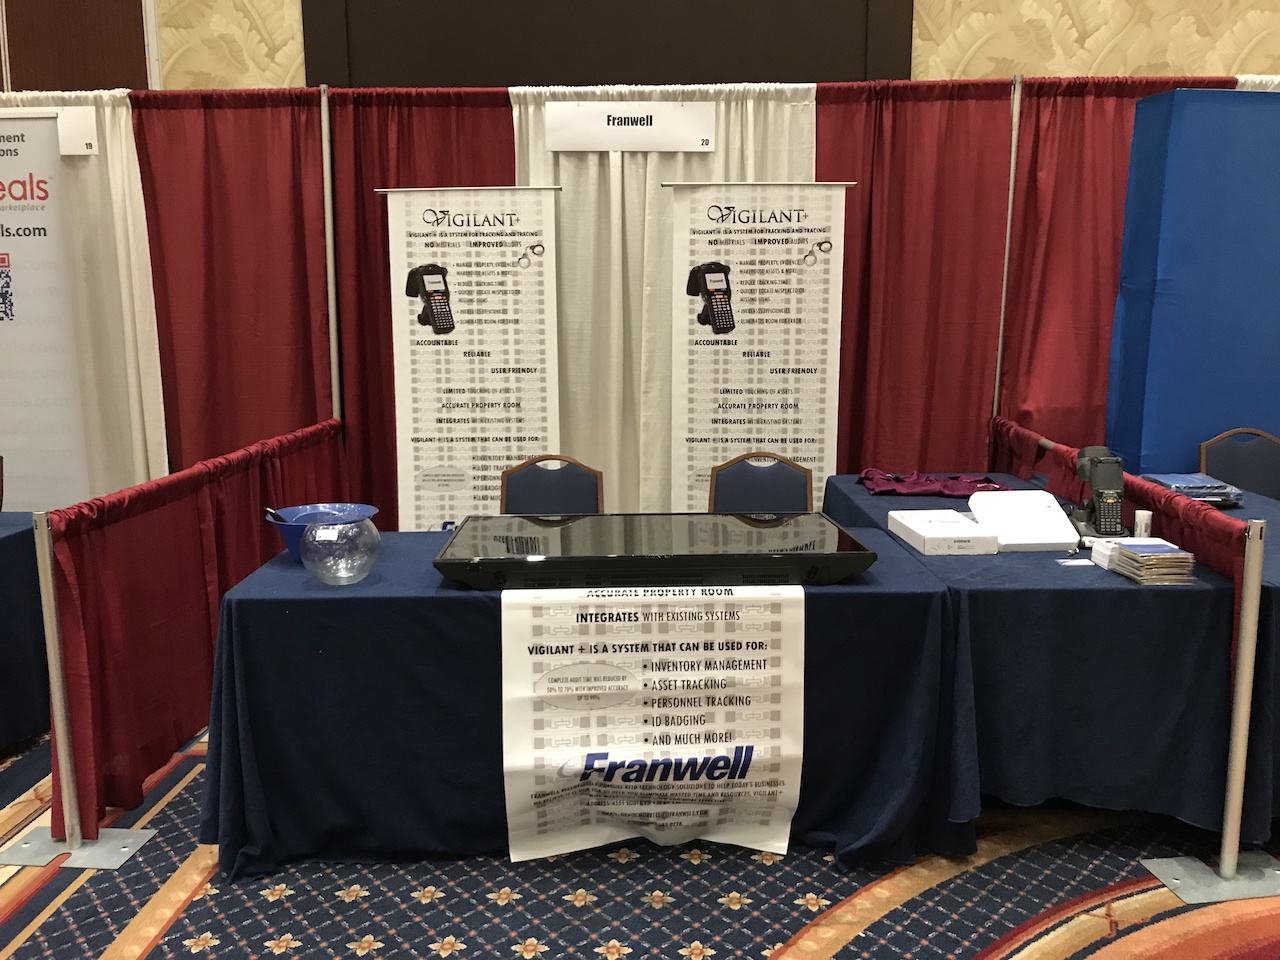 vendor-booth-franwell